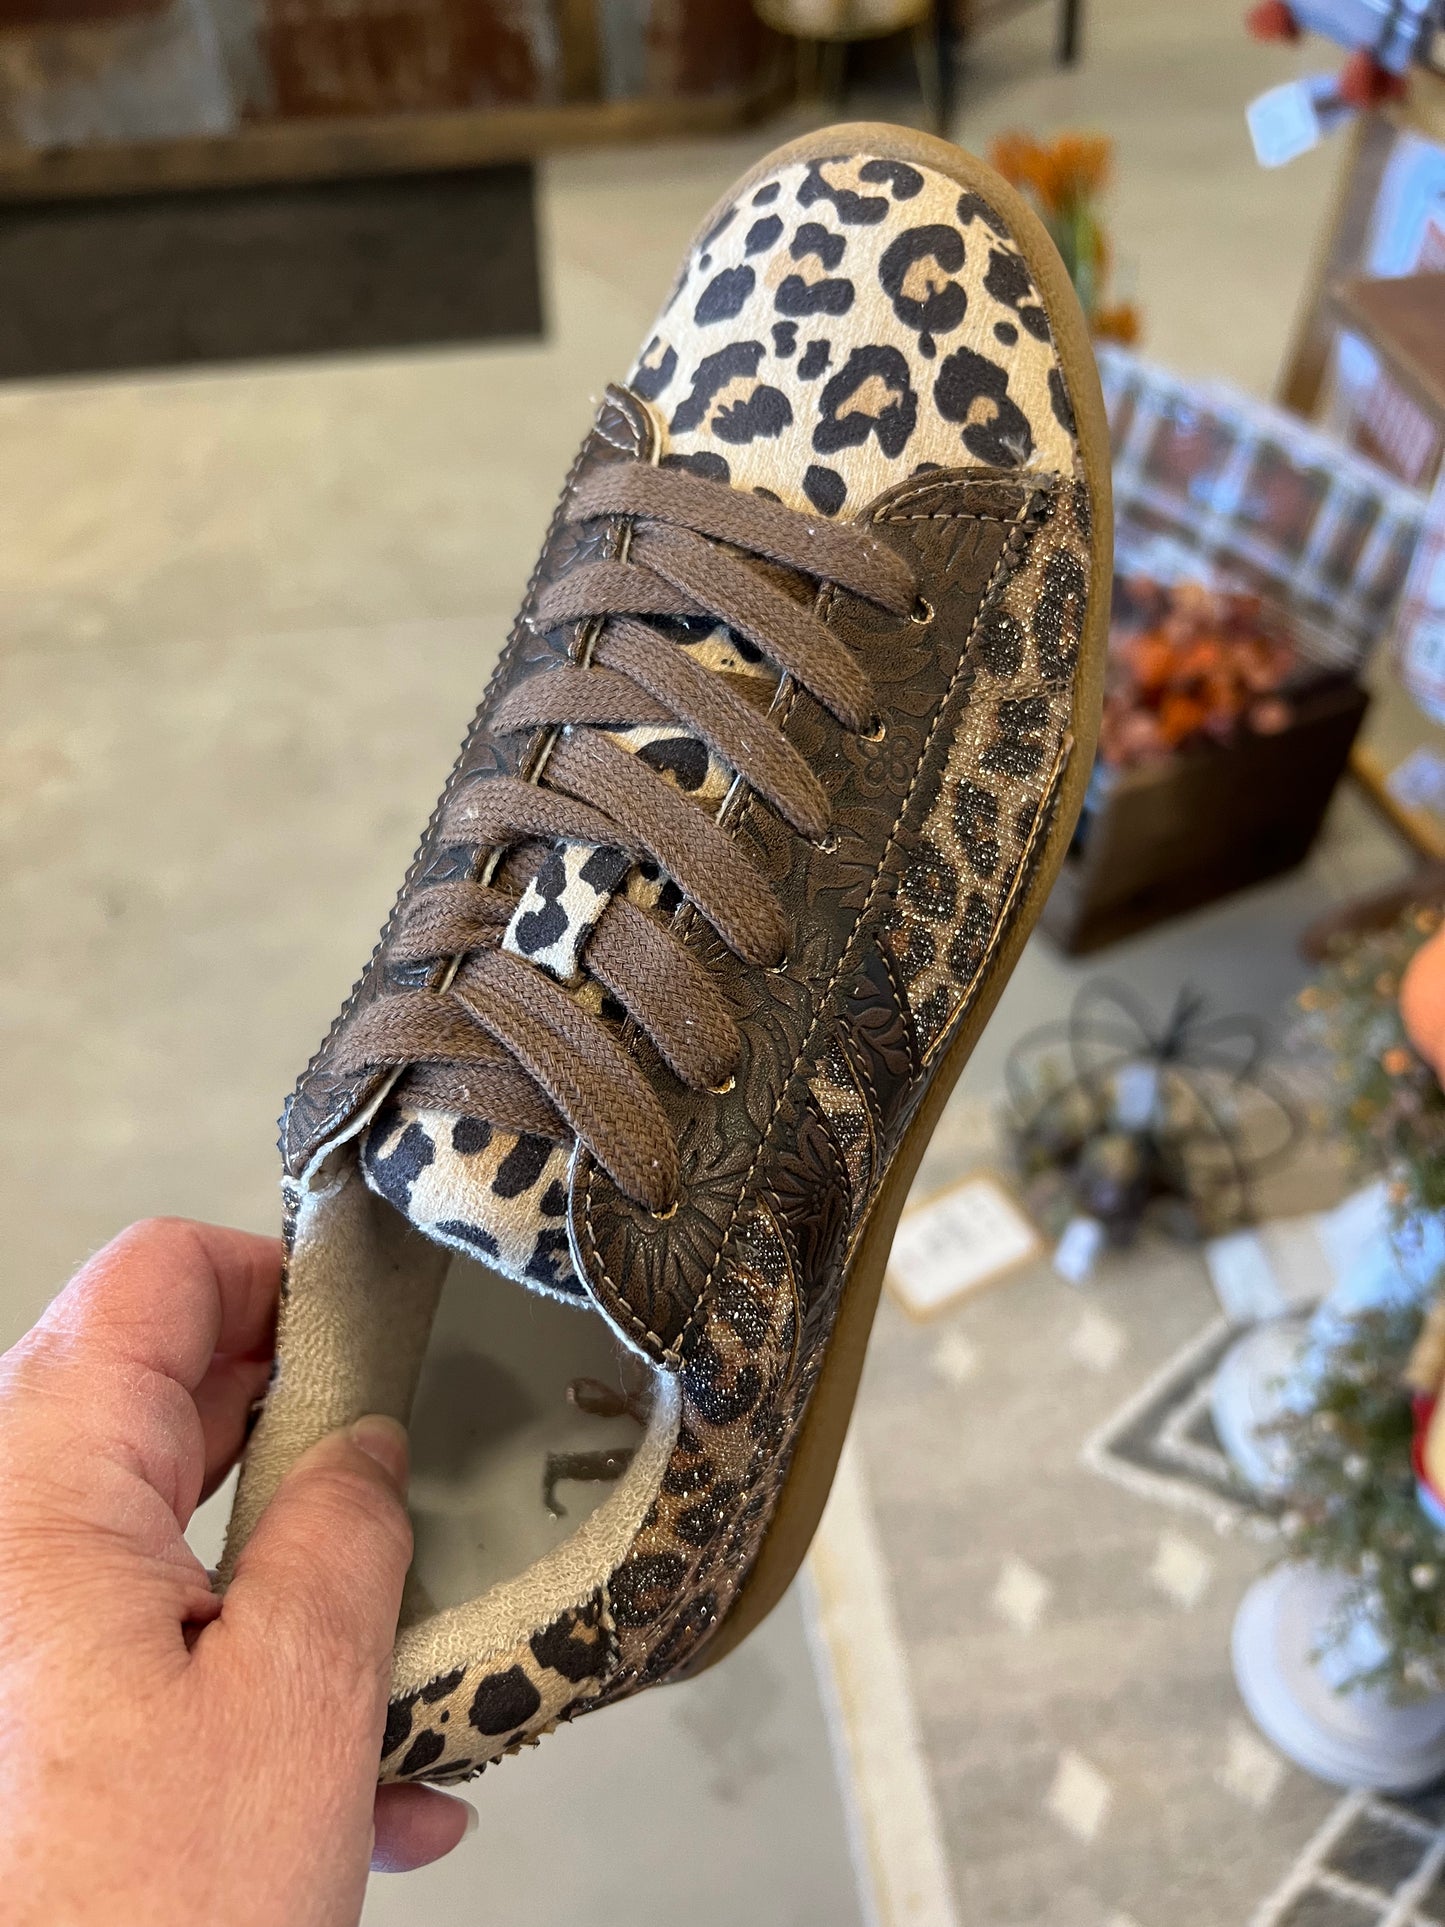 Champ Slip On Shoes in Tan Leopard by Very G